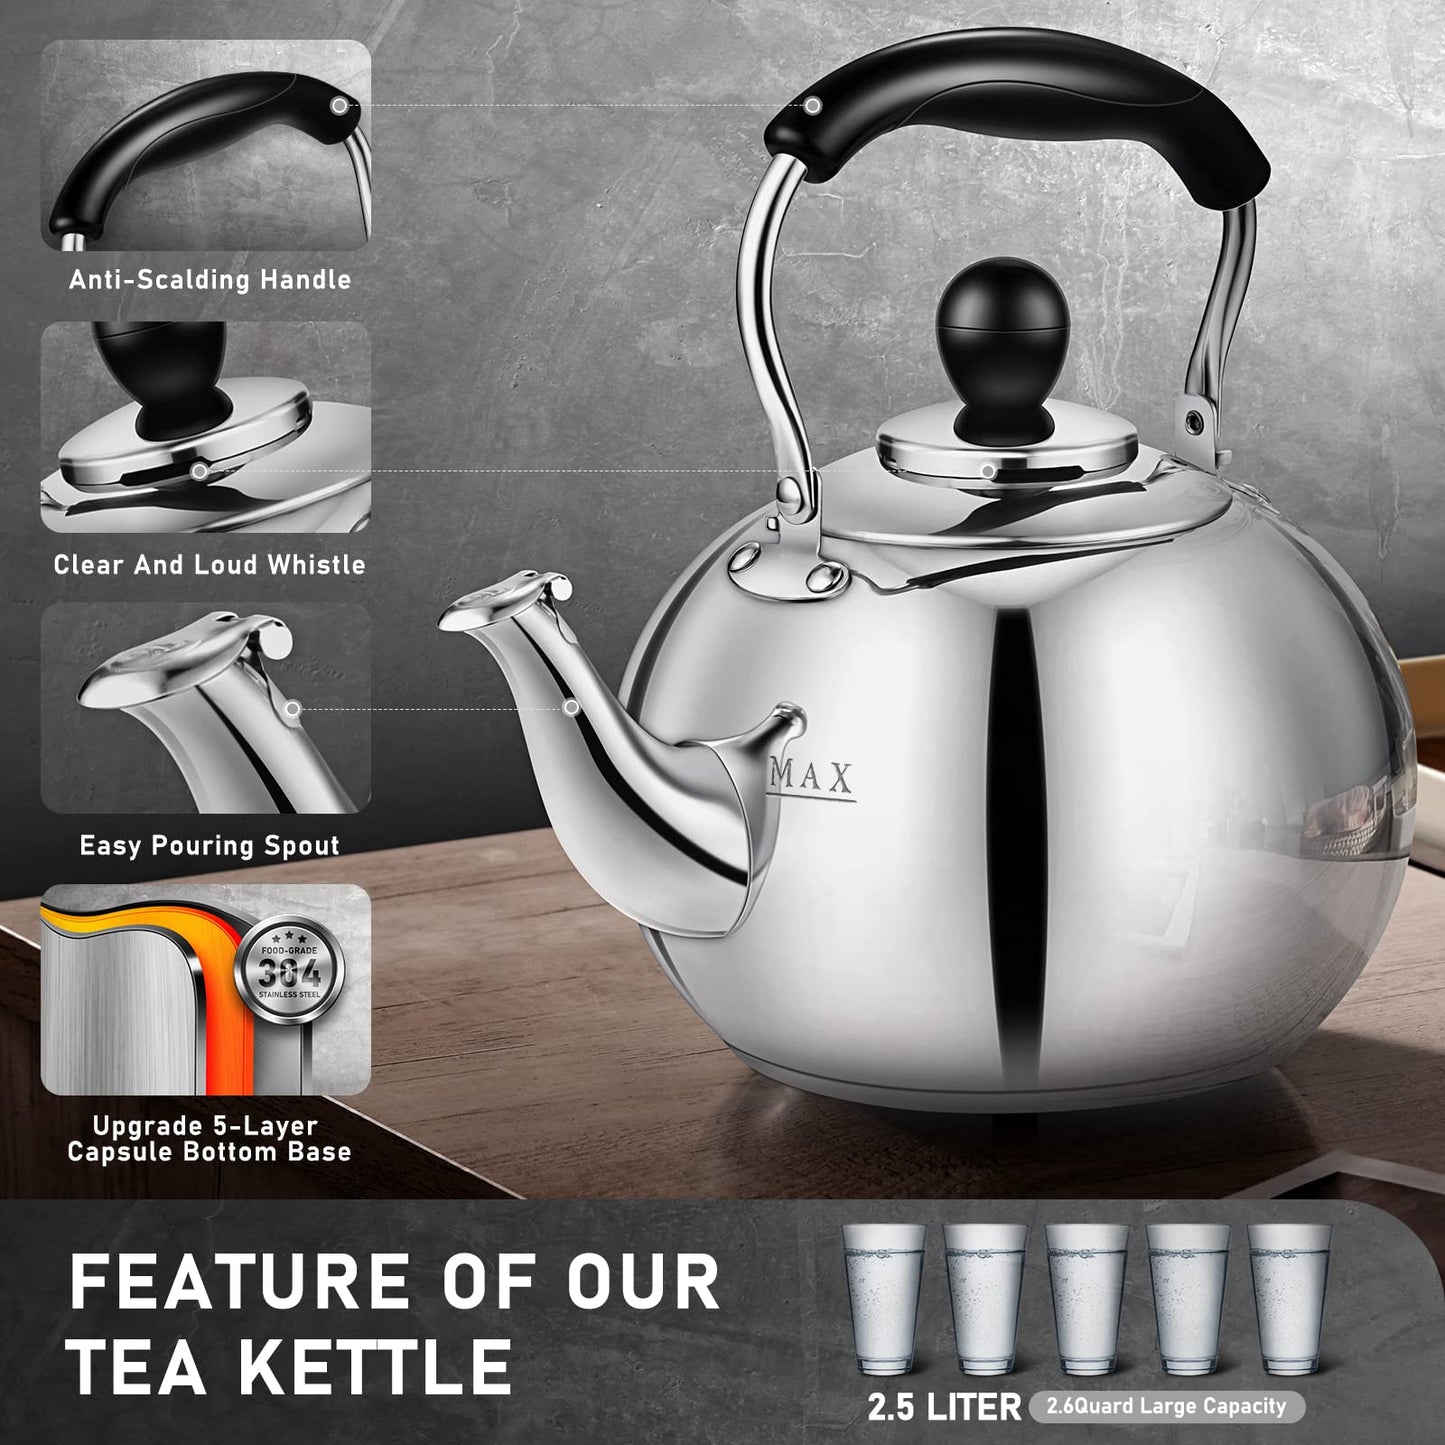 Dclobtop Whistling Tea Kettle Stovetop - 2.5 Quart Round Tea Kettle Stovetop, Silver Mirror Polished Classic Stovetop Kettle, Food Grade Material Kettle Teapot for Stove Top